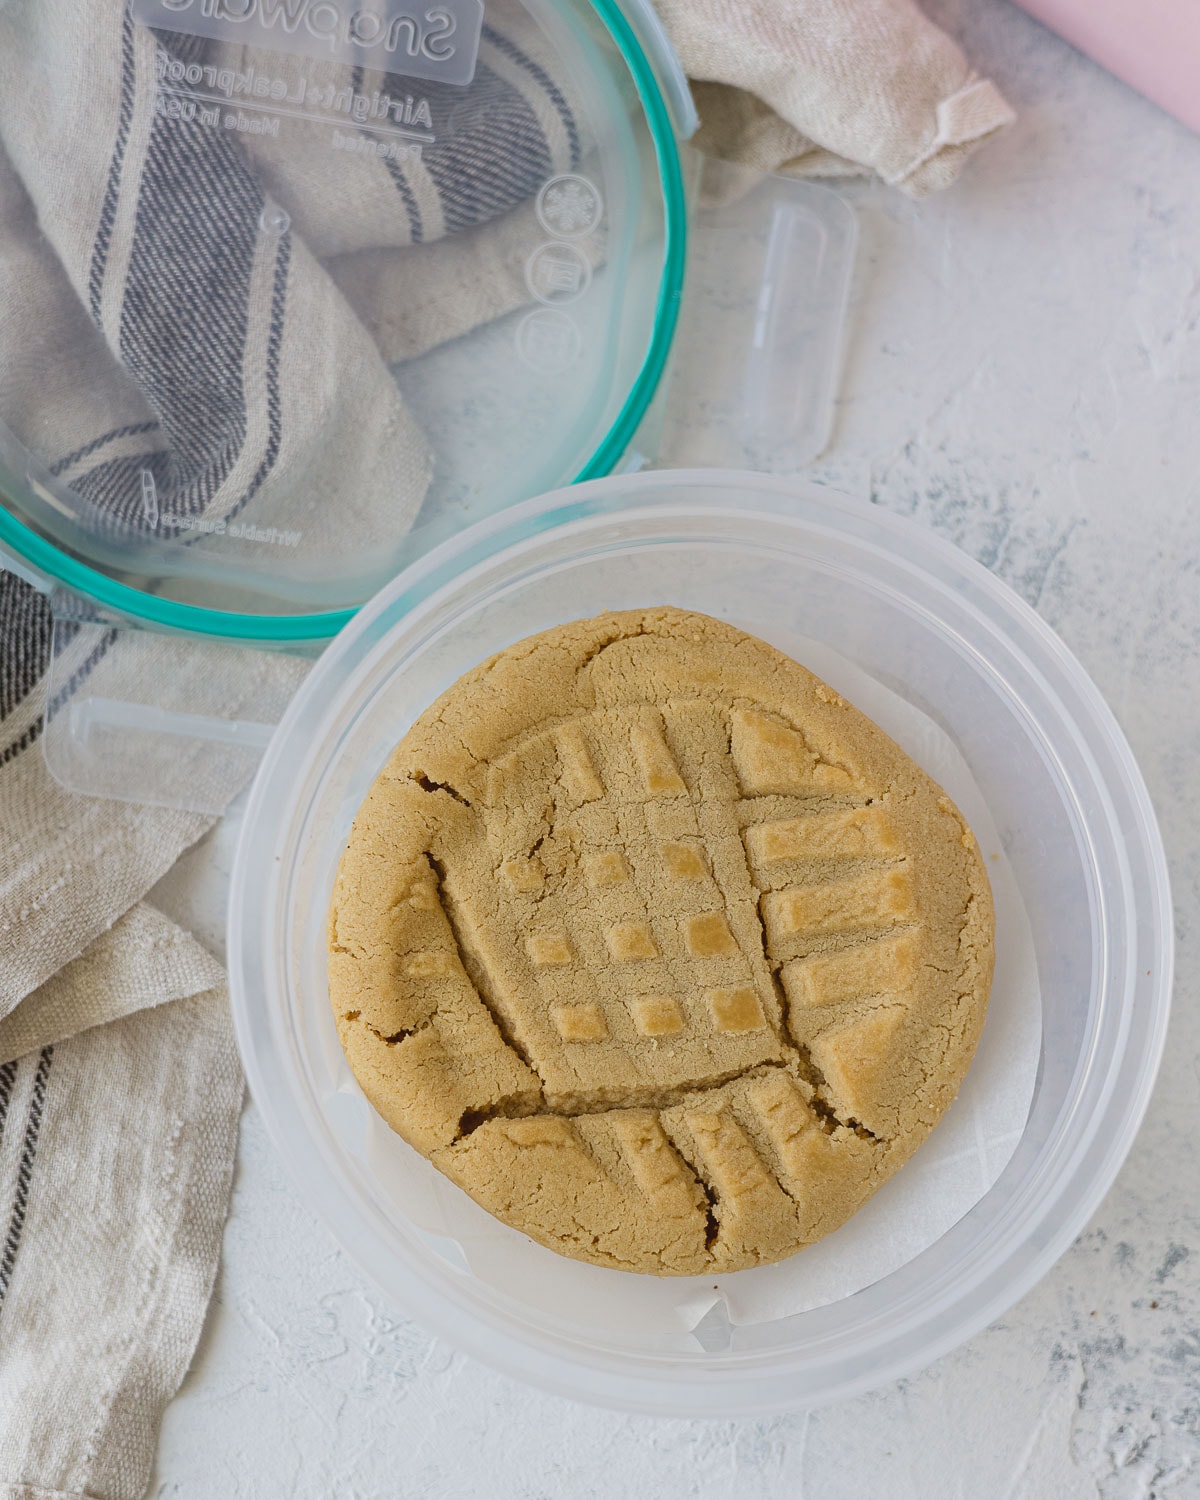 A peanut butter cookie in a snapware container with the lid removed.